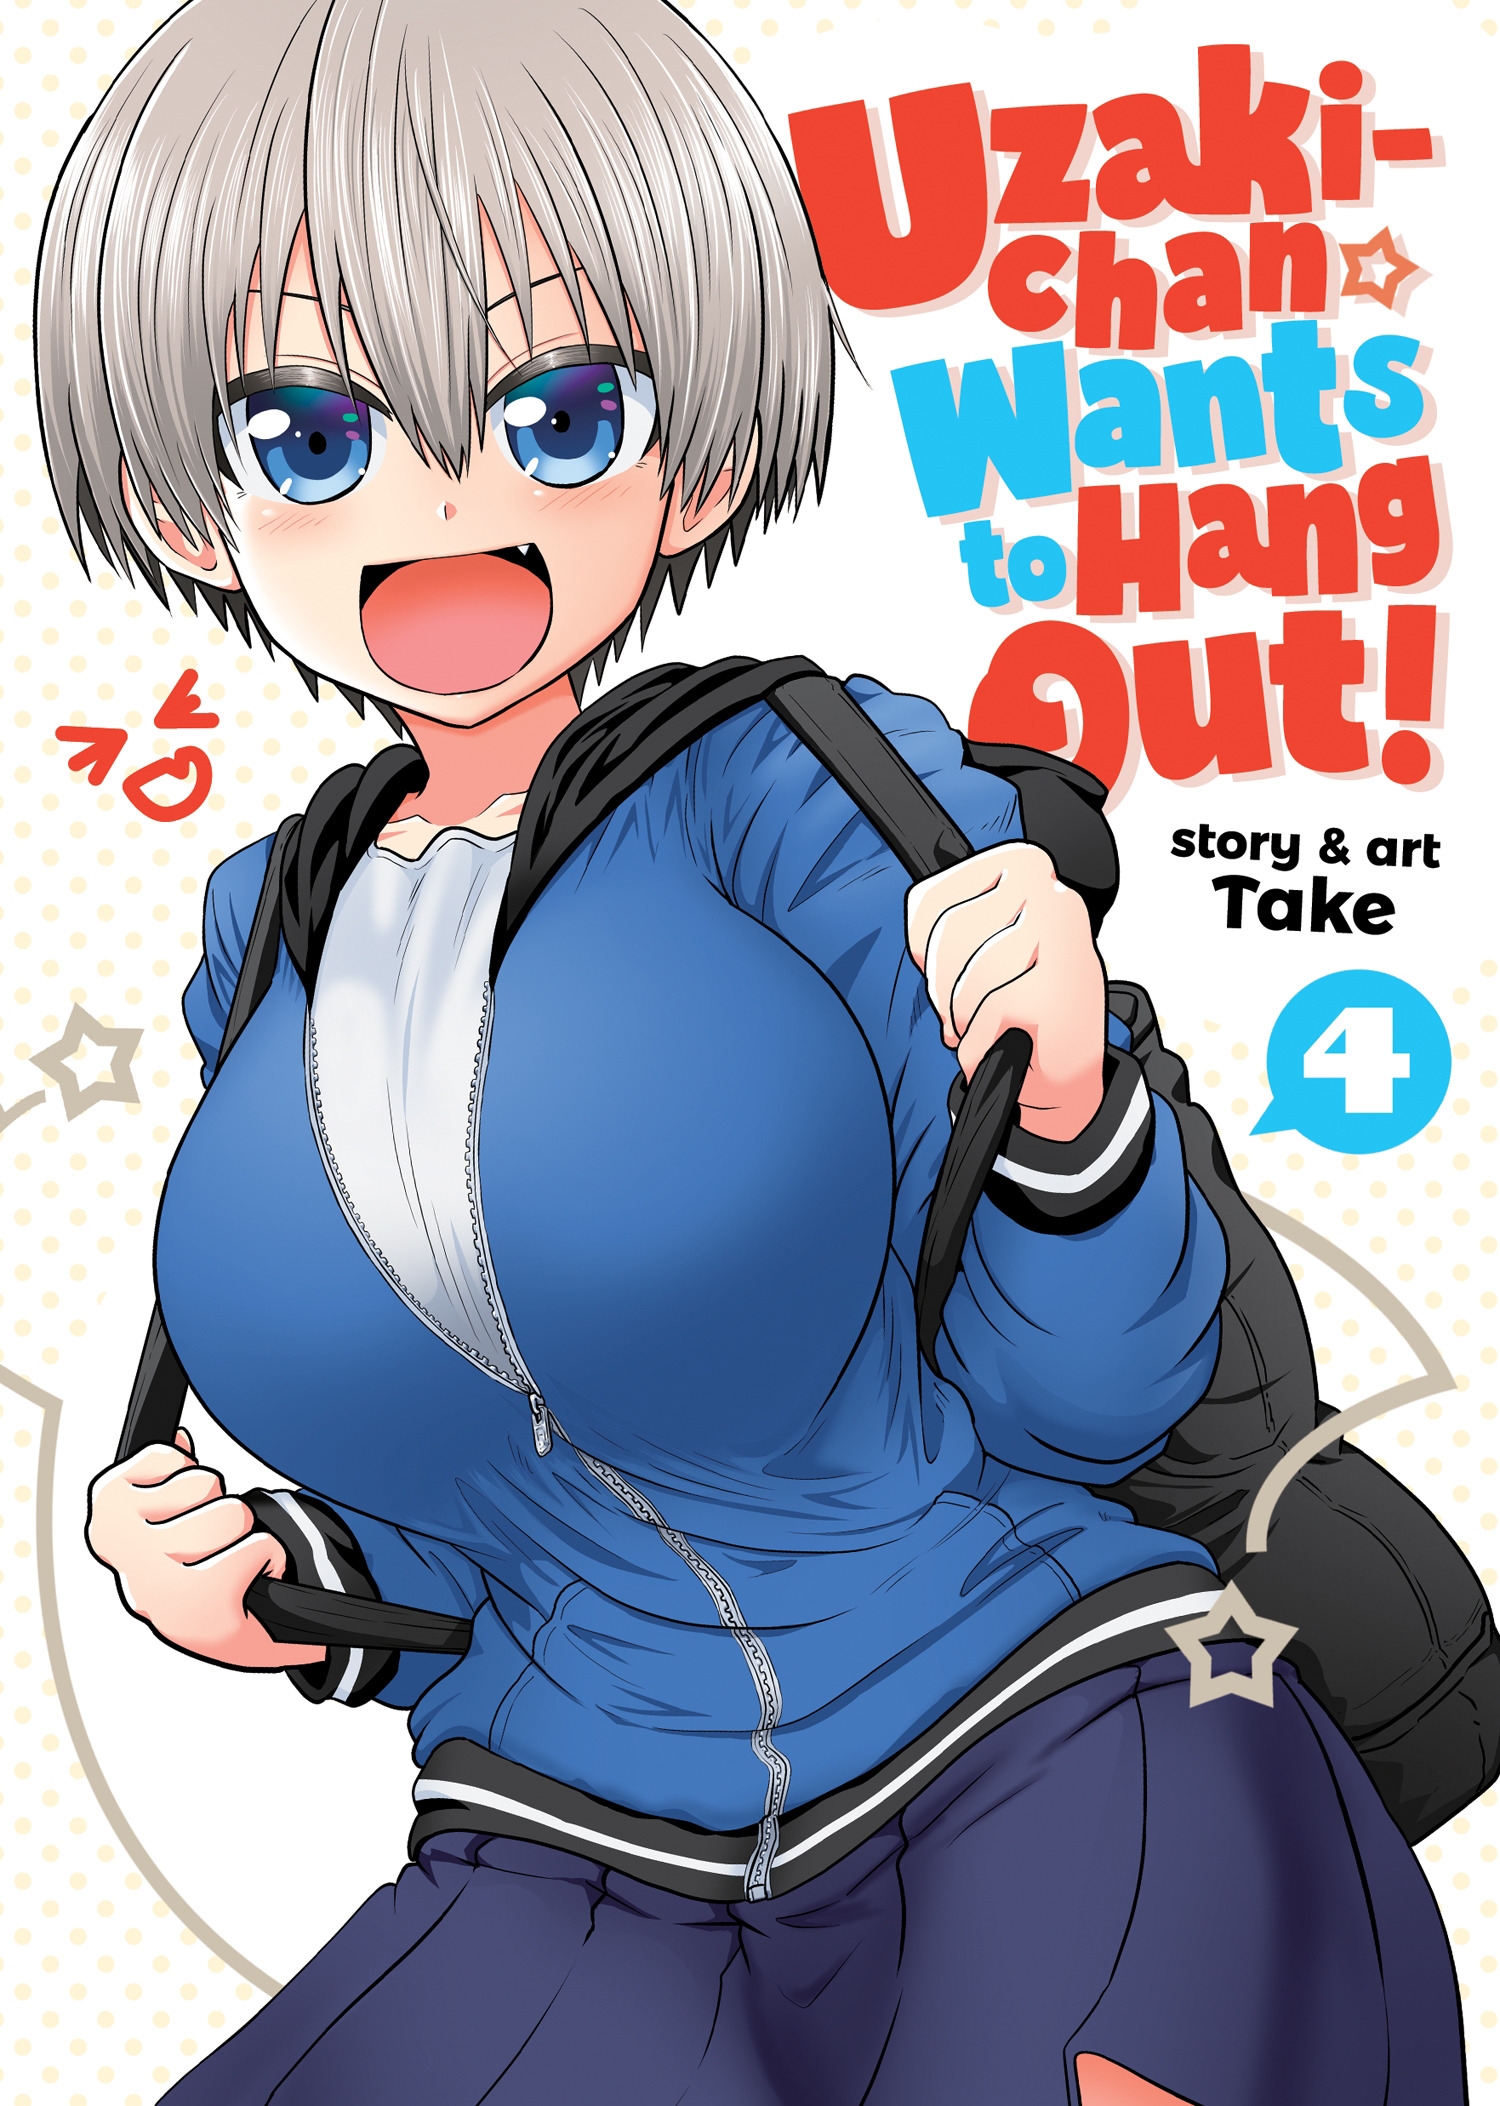 Uzaki-chan Wants to Hang Out! Vol. 4 by Take - Penguin Books New Zealand